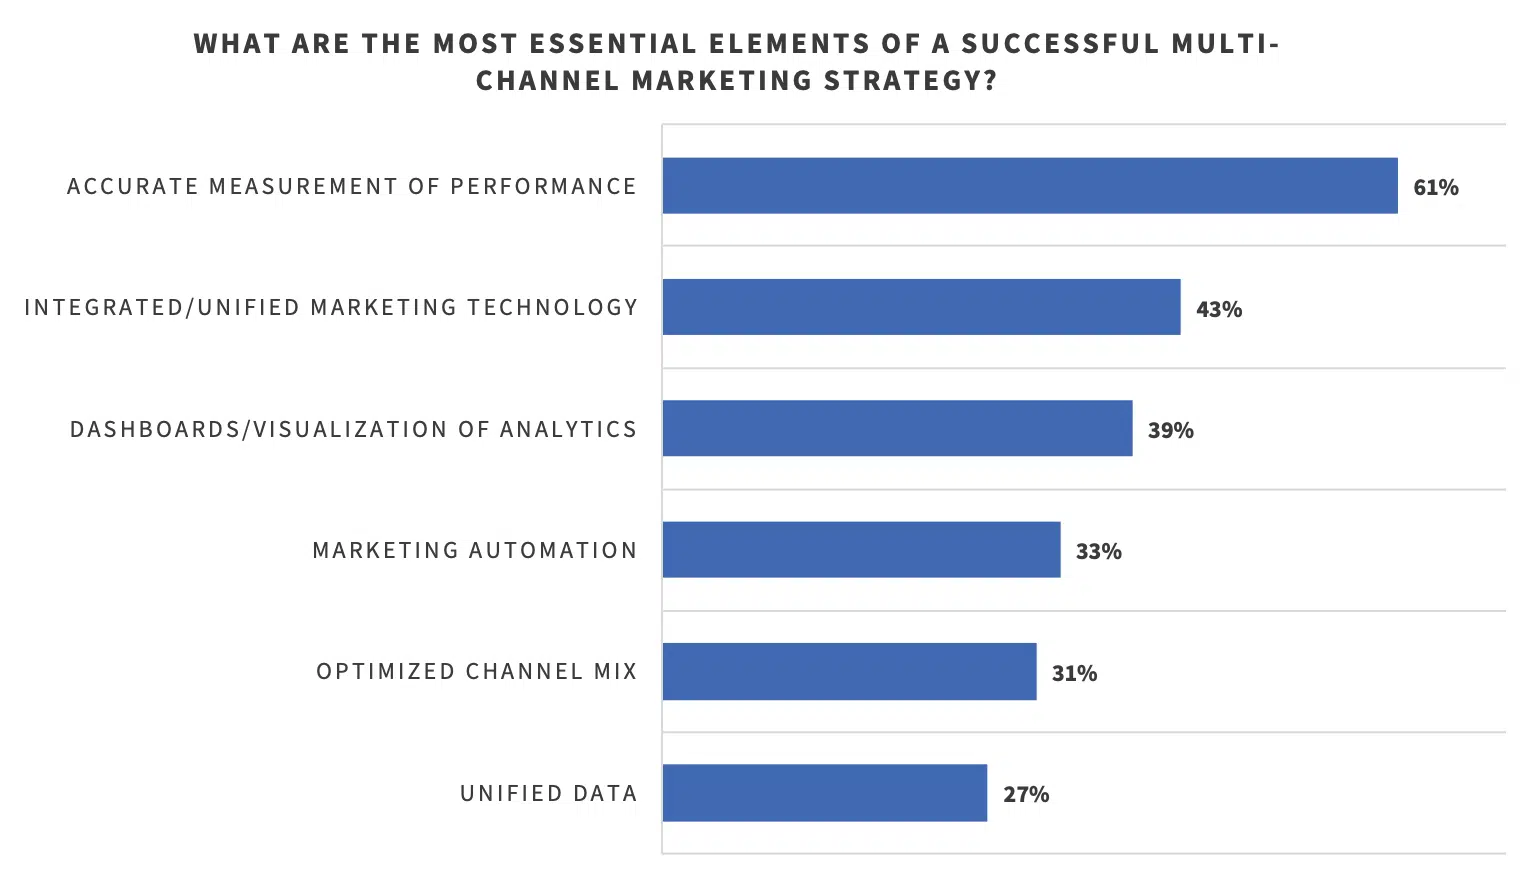 31% of marketers prefer a marketing automation strategy to measure marketing performance accurately.